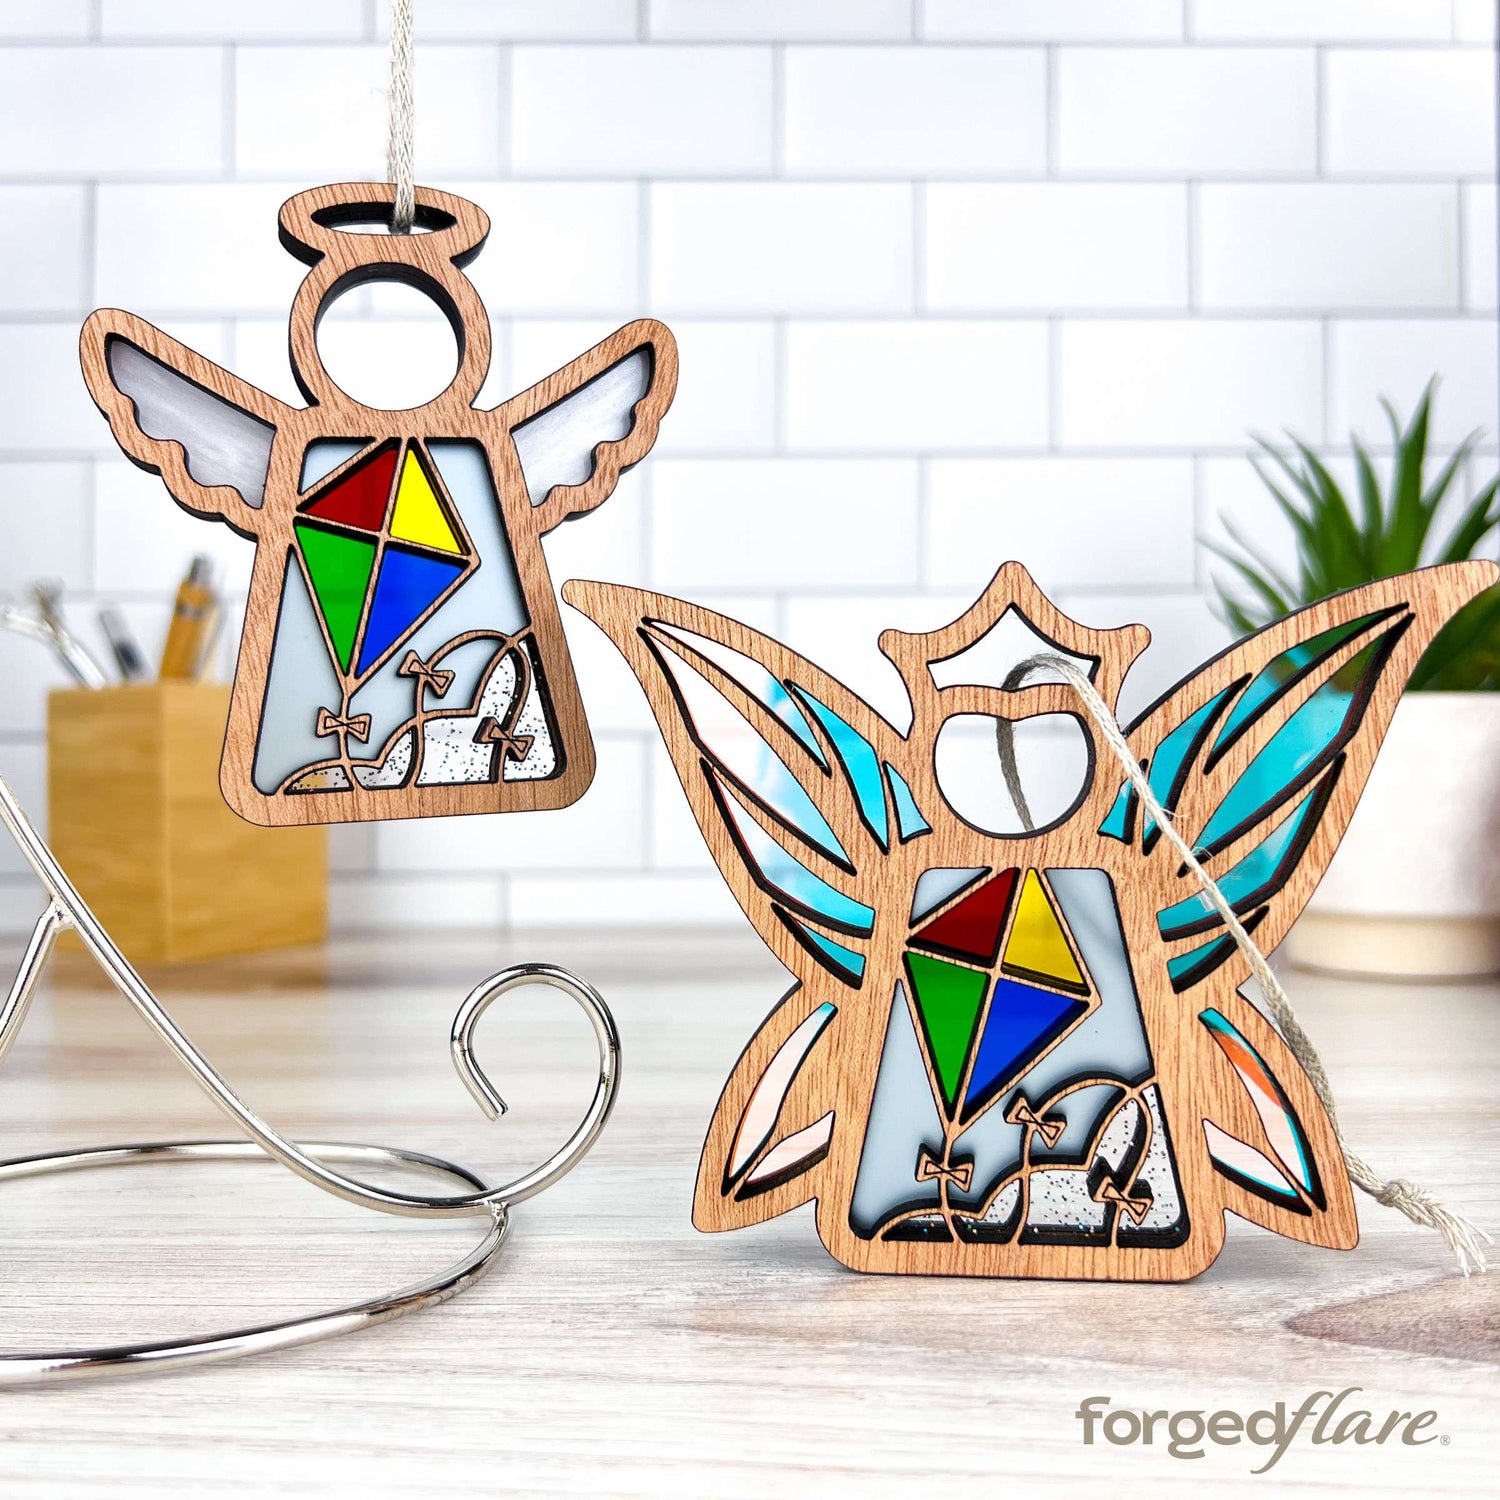 Fly A Kite for Charity Mother’s Angels® and fairy ornaments.